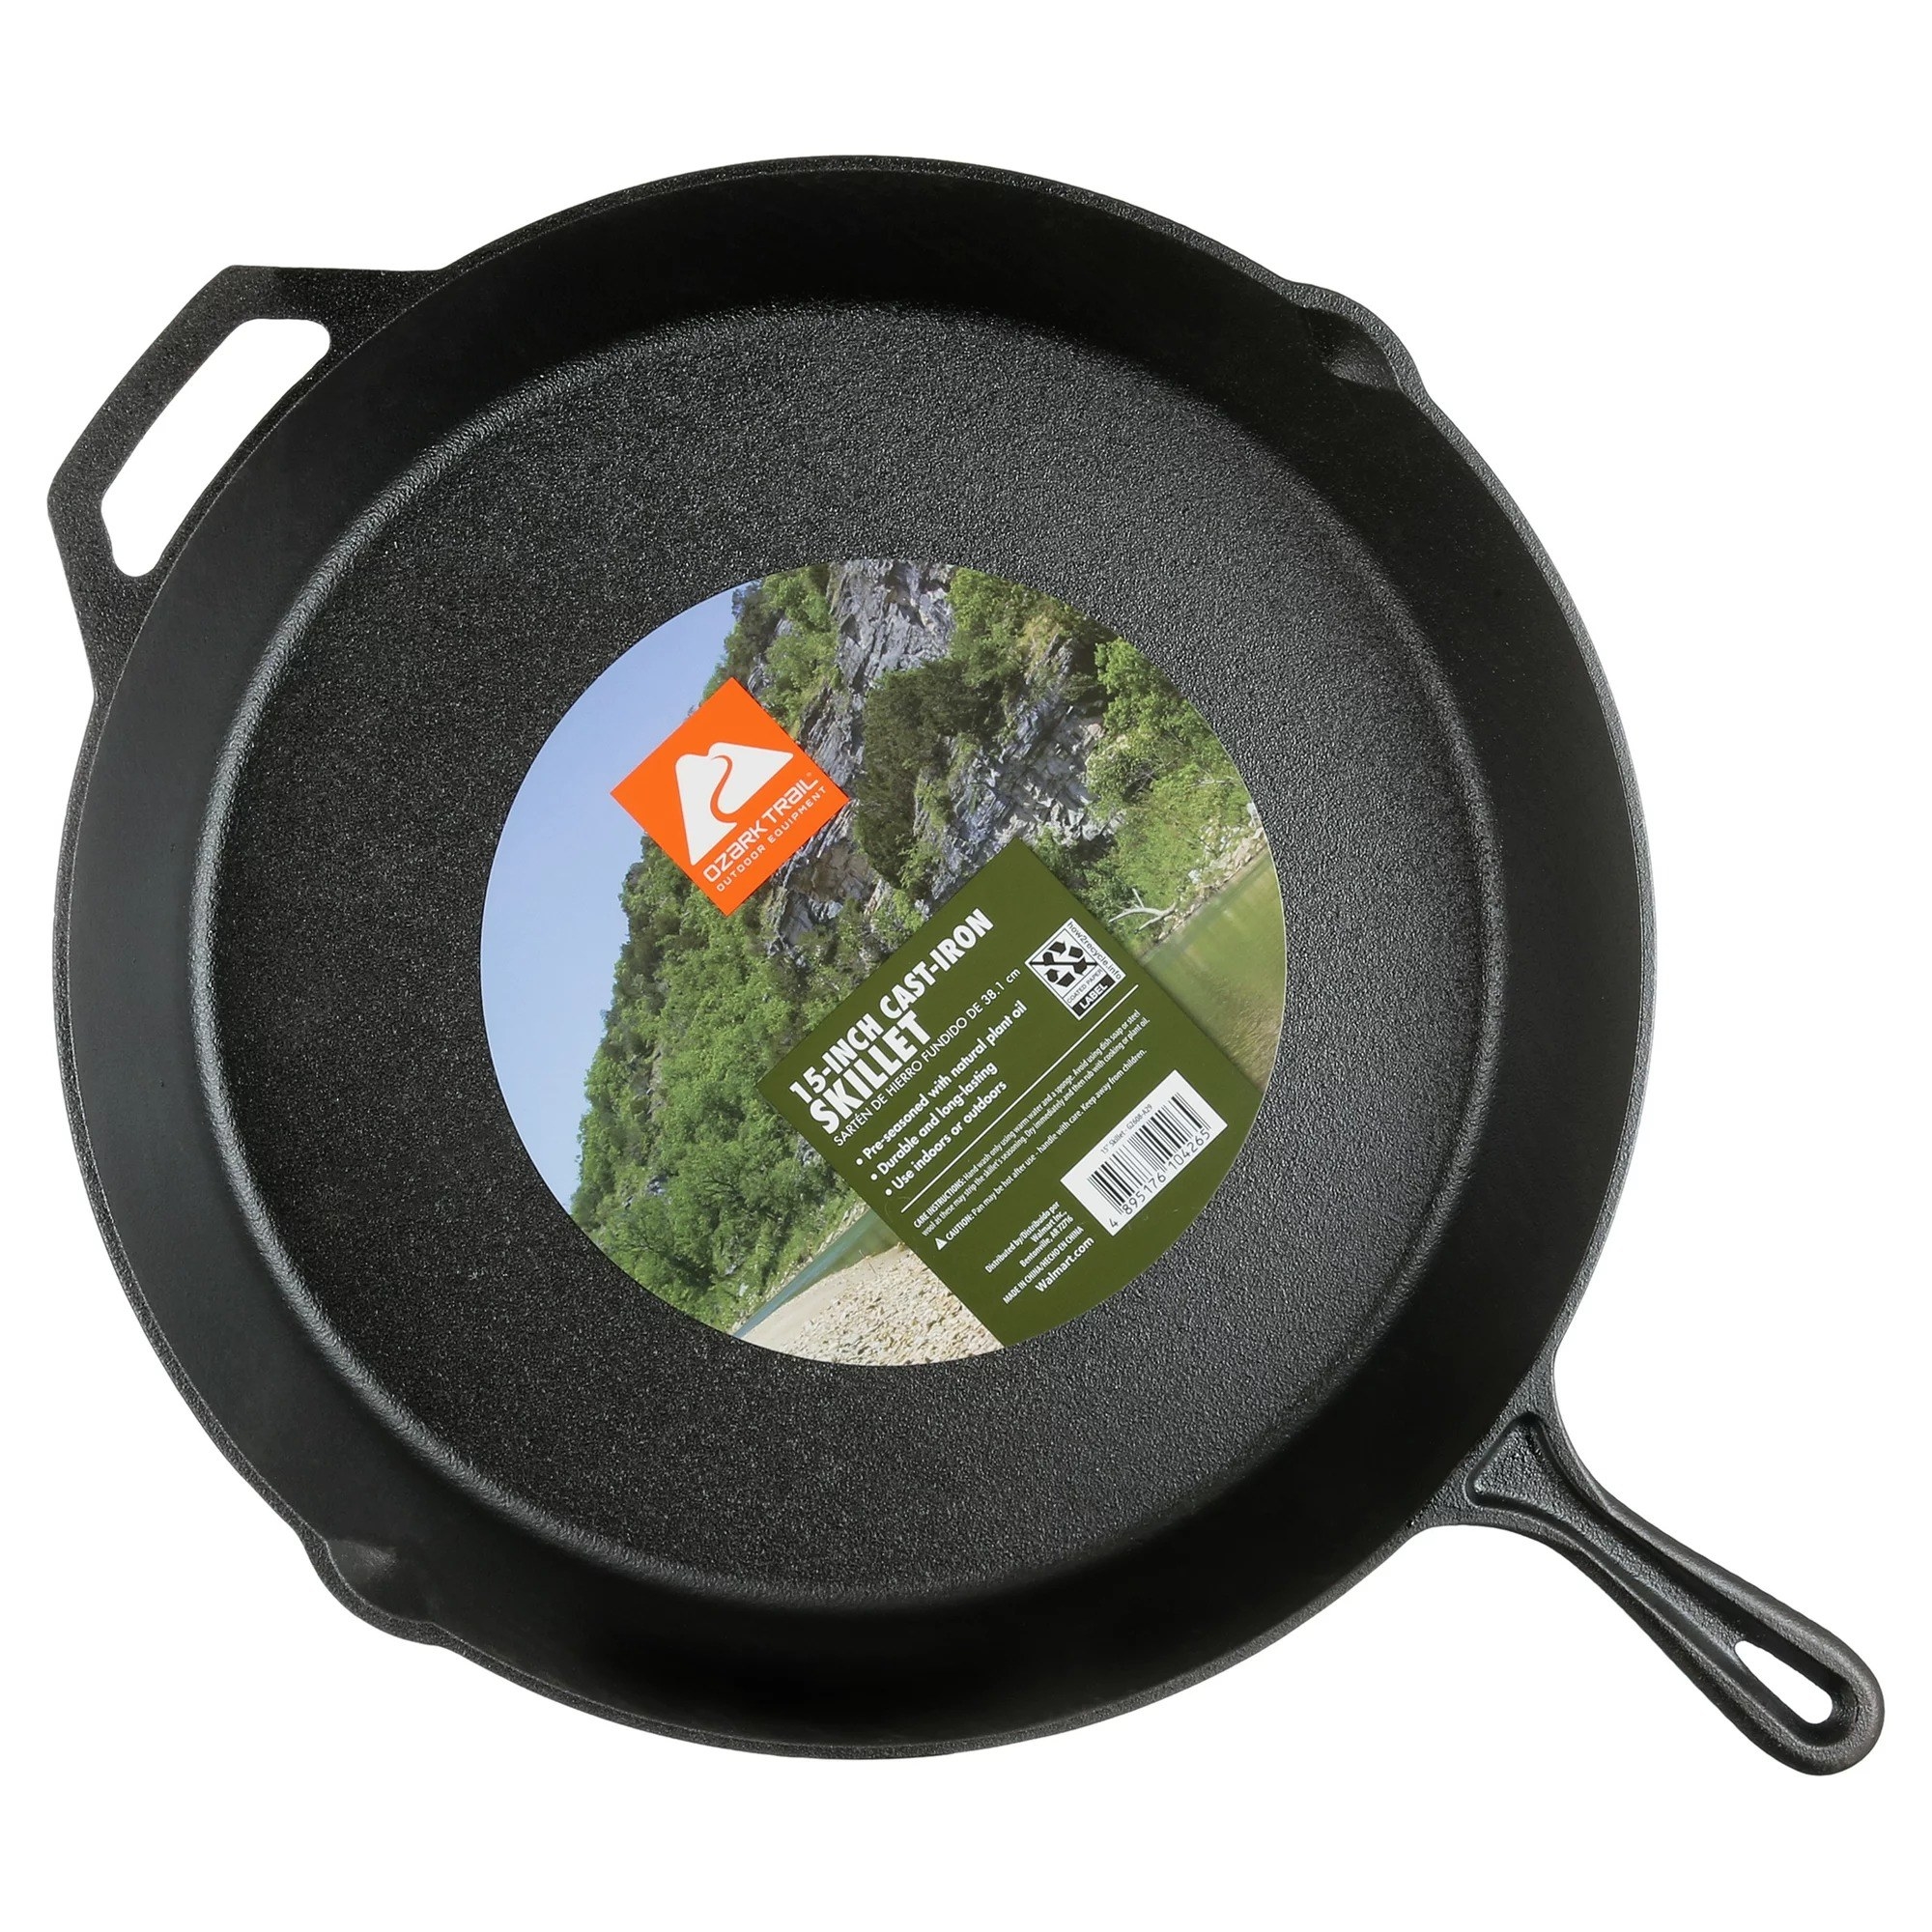 The skillet with a lip on either side and a handle